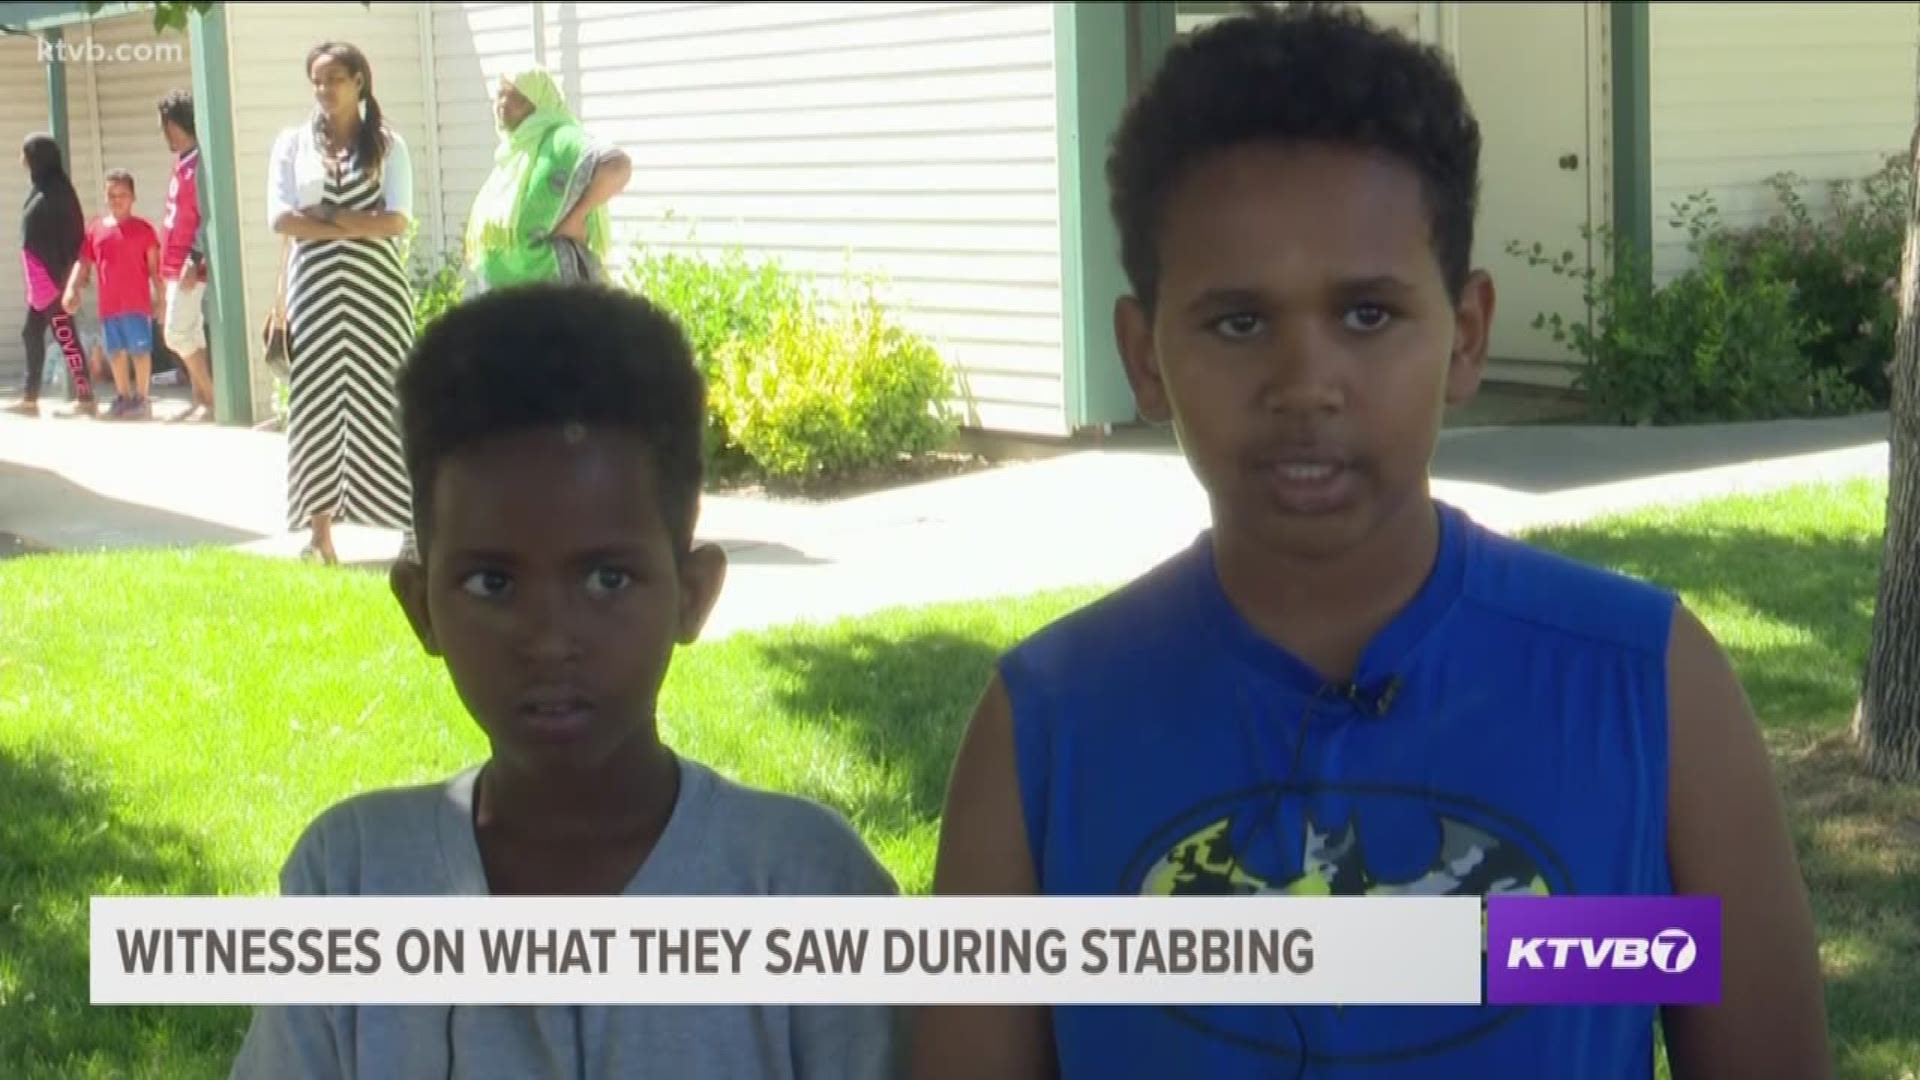 KTVB spoke with two kids who say they saw 30-year-old Timmy Kinner stab several people, including kids Saturday night in Boise.